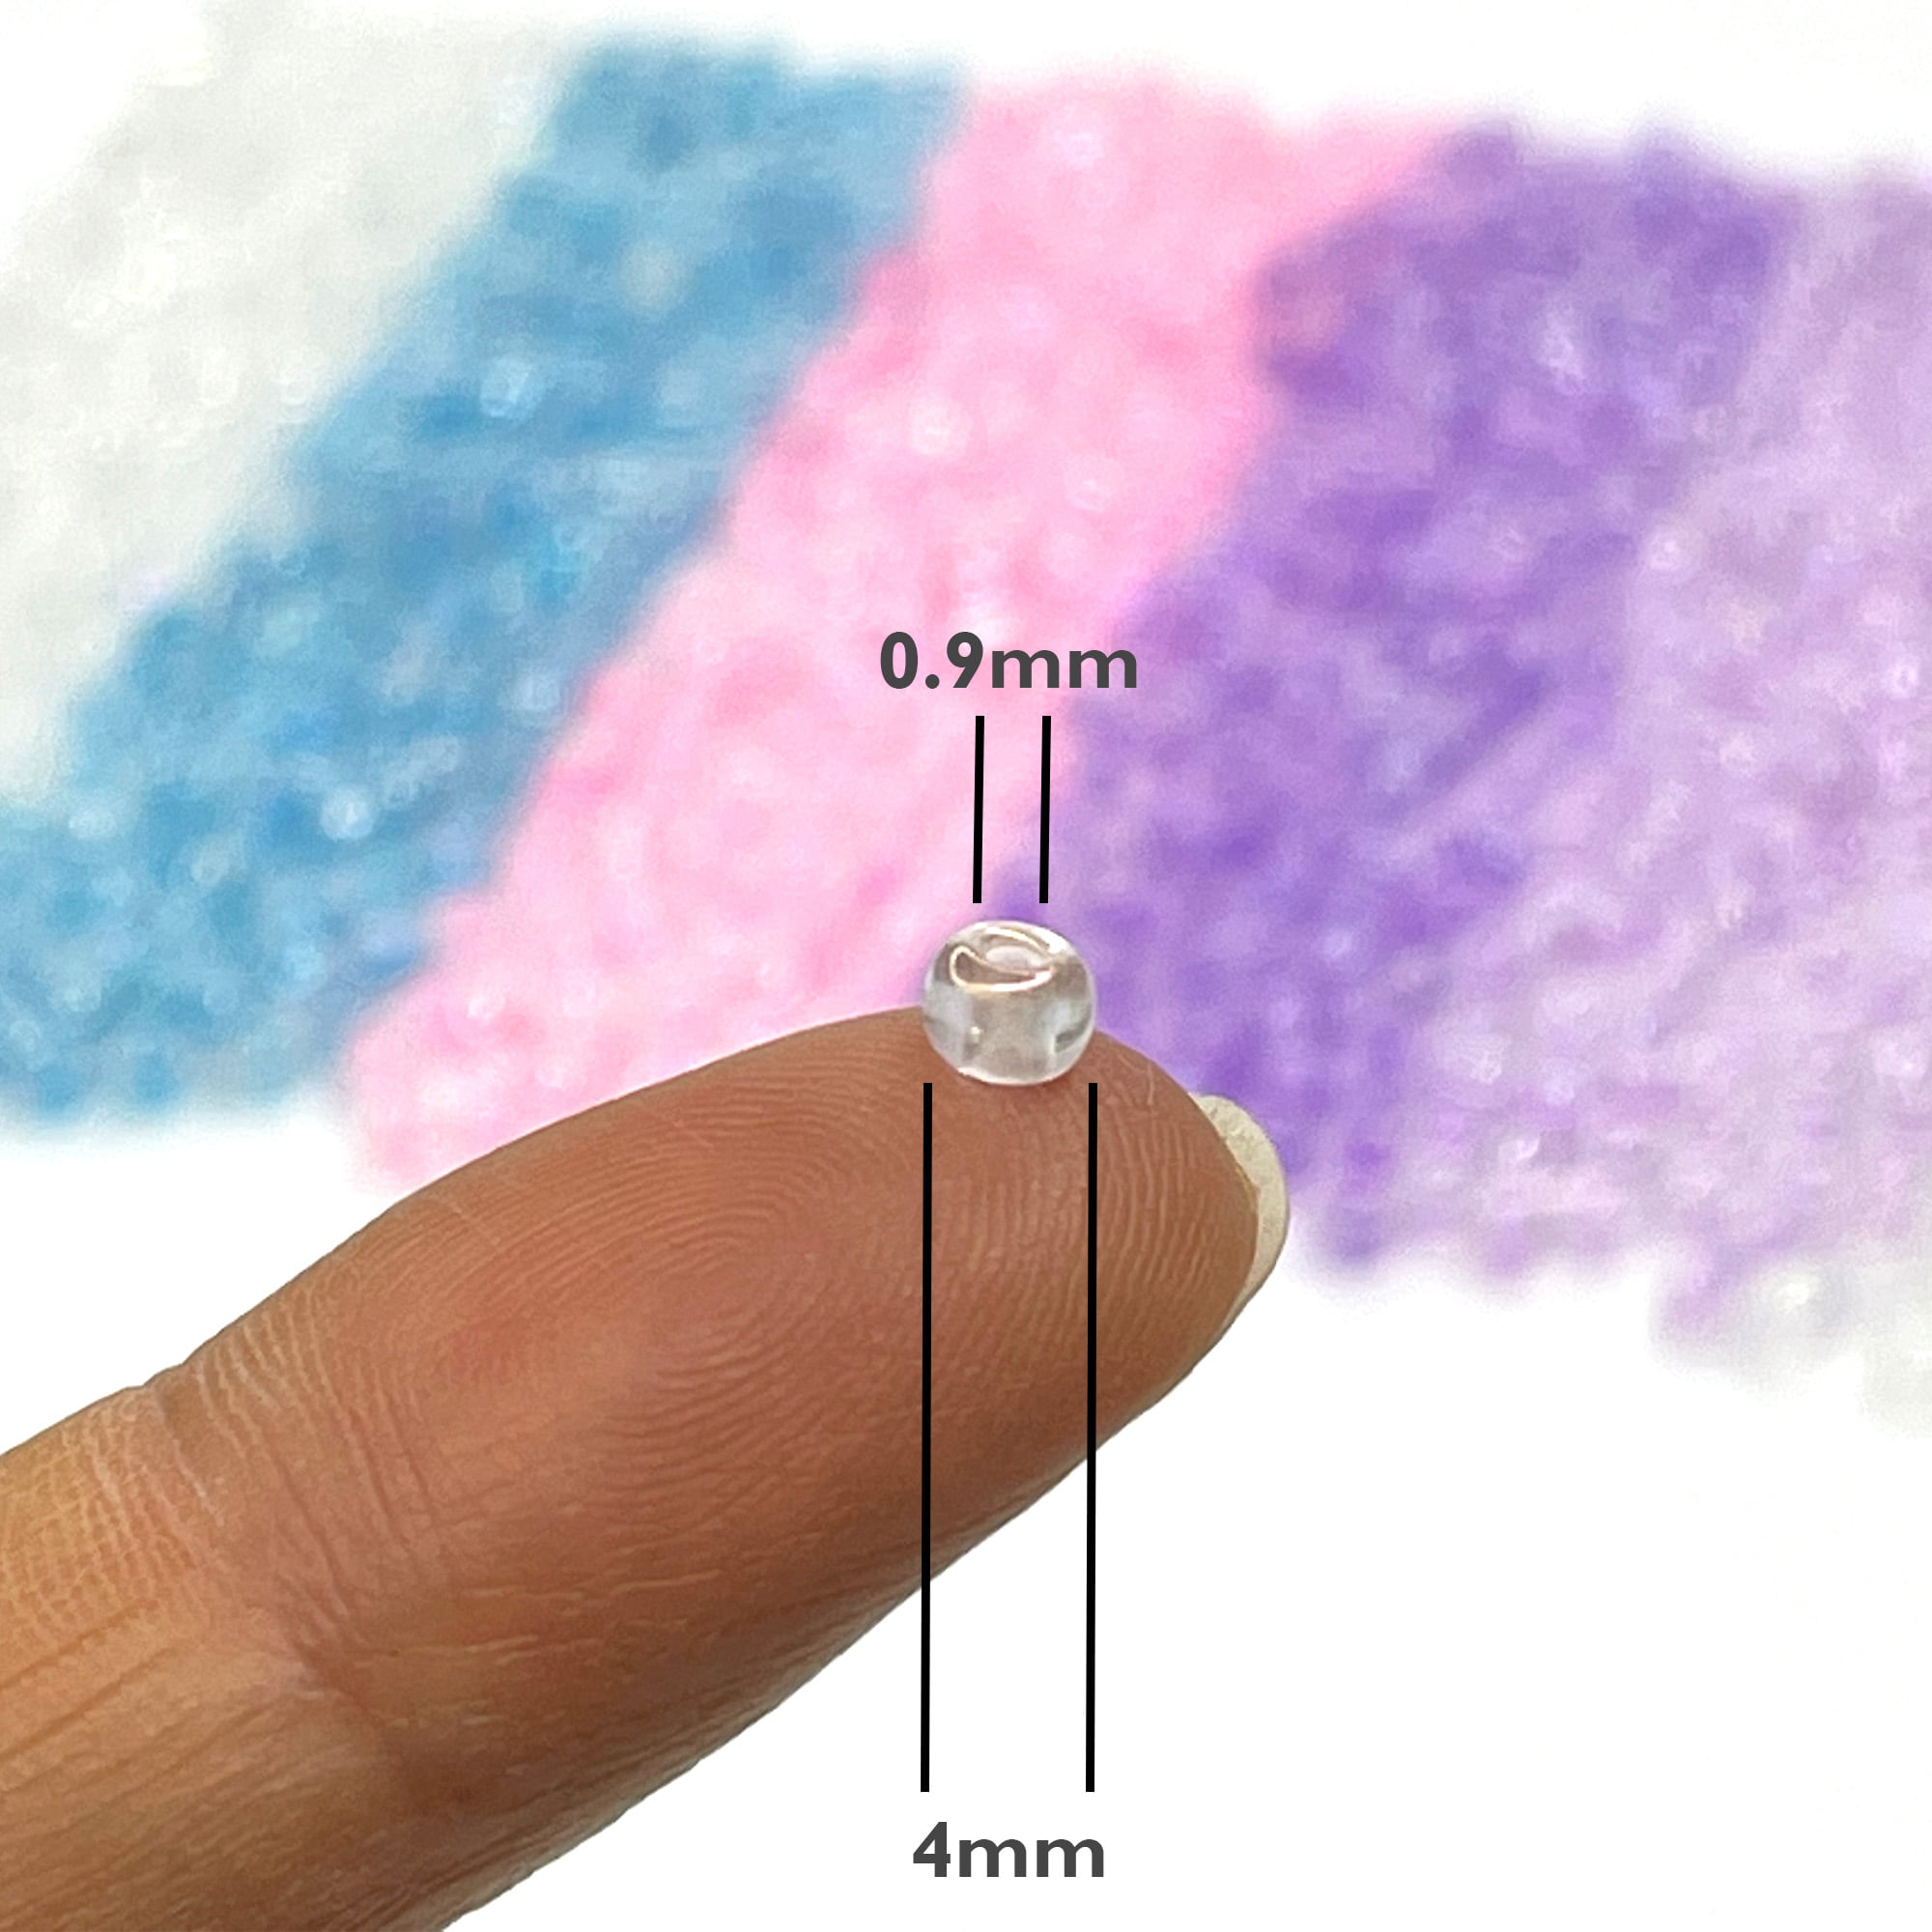  DICOBD 6000pcs 4mm 6/0 Glass Seed Beads Craft Beads